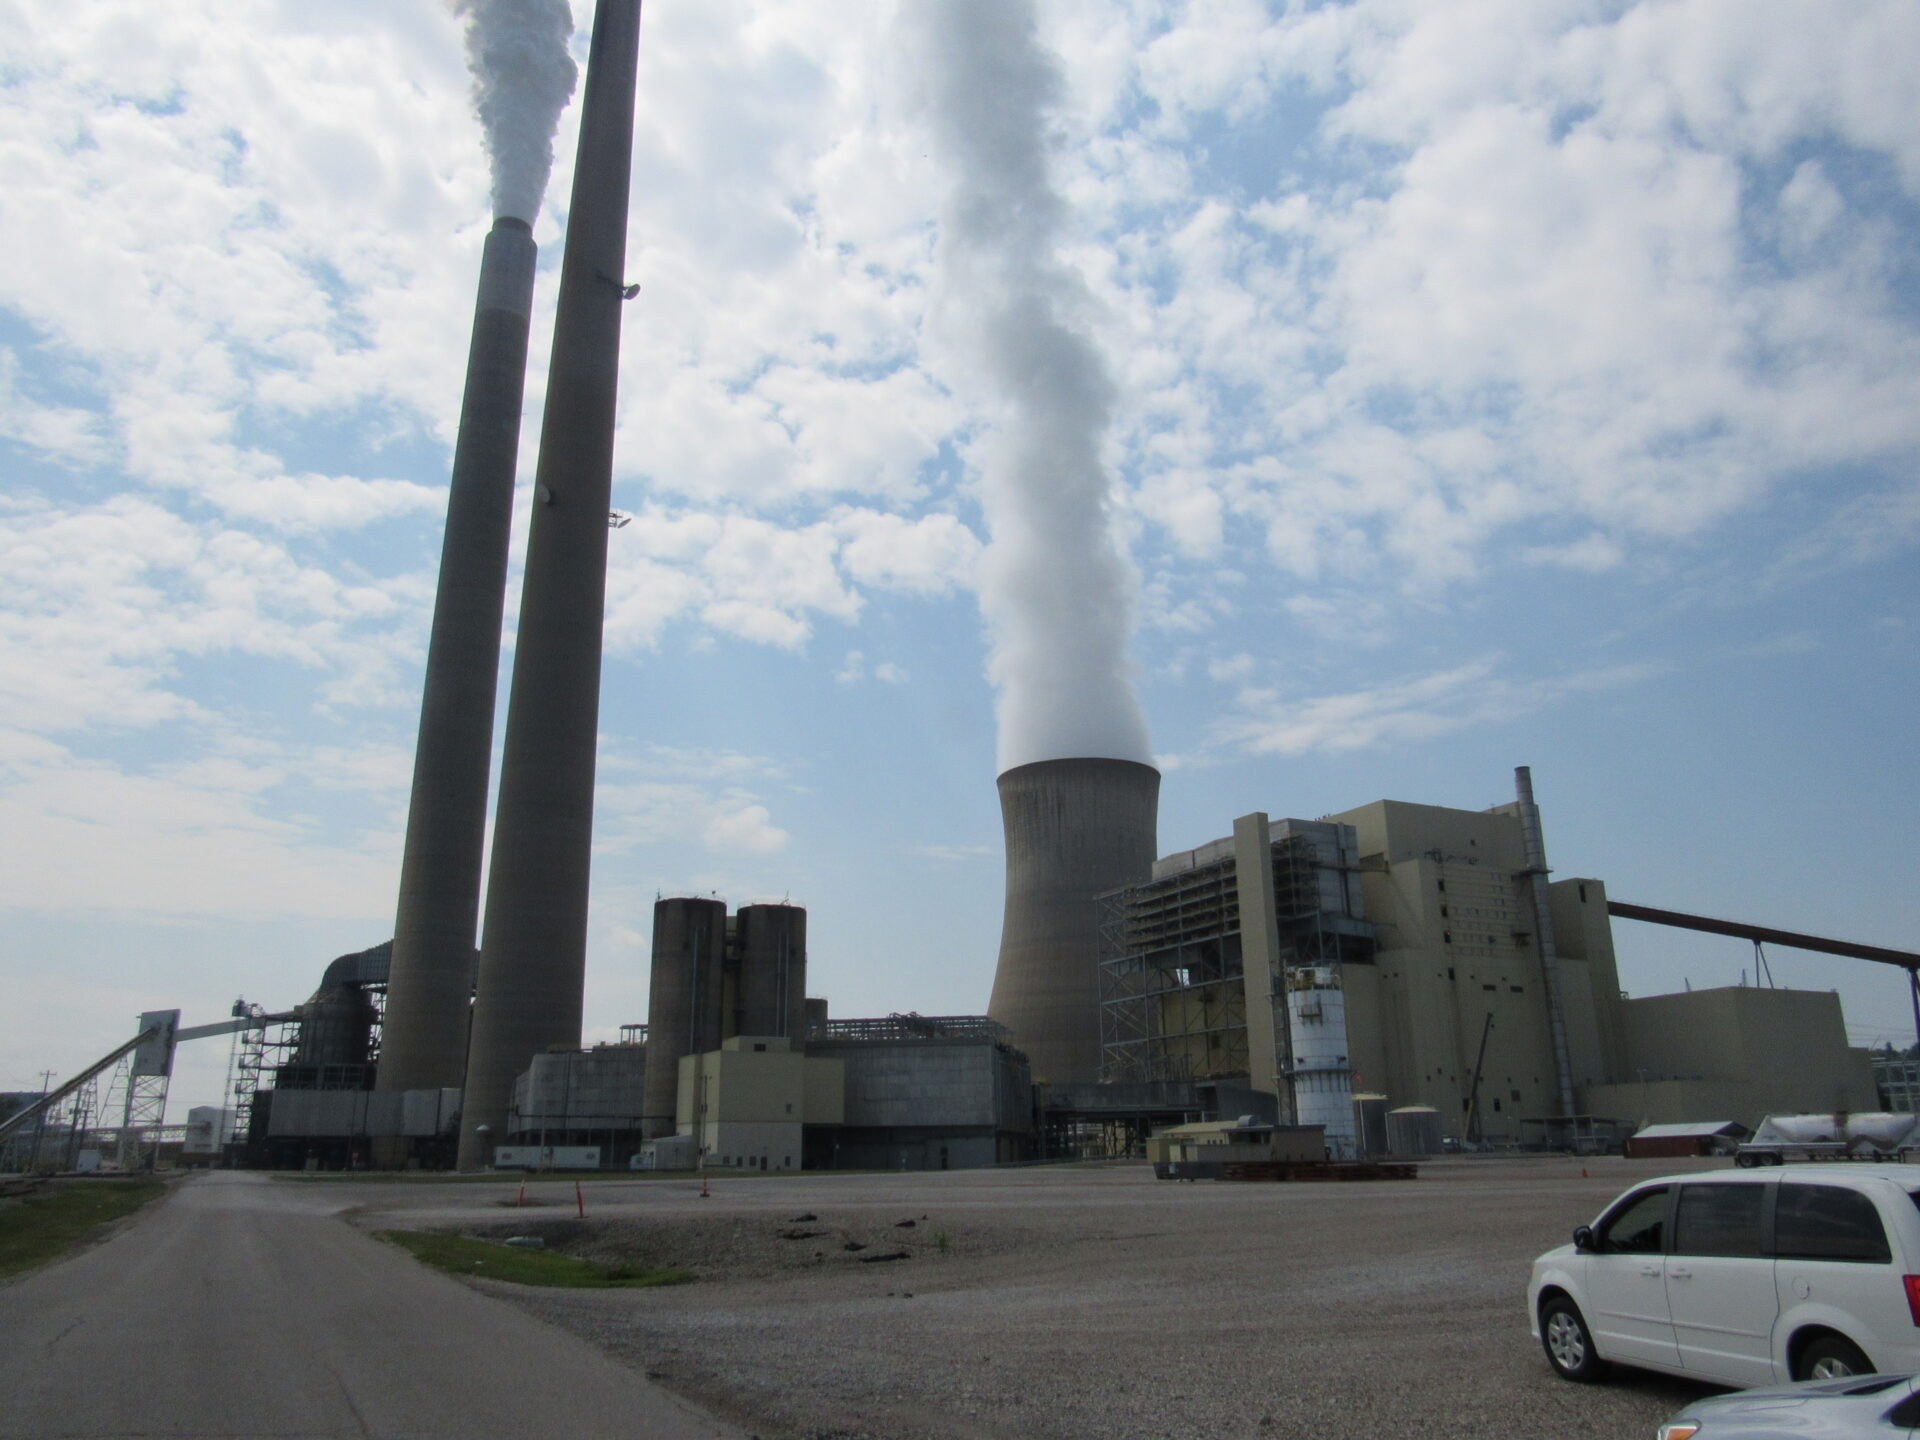 A picture of Appalachian Power's Mountaineer plant in Mason County, West Virginia.